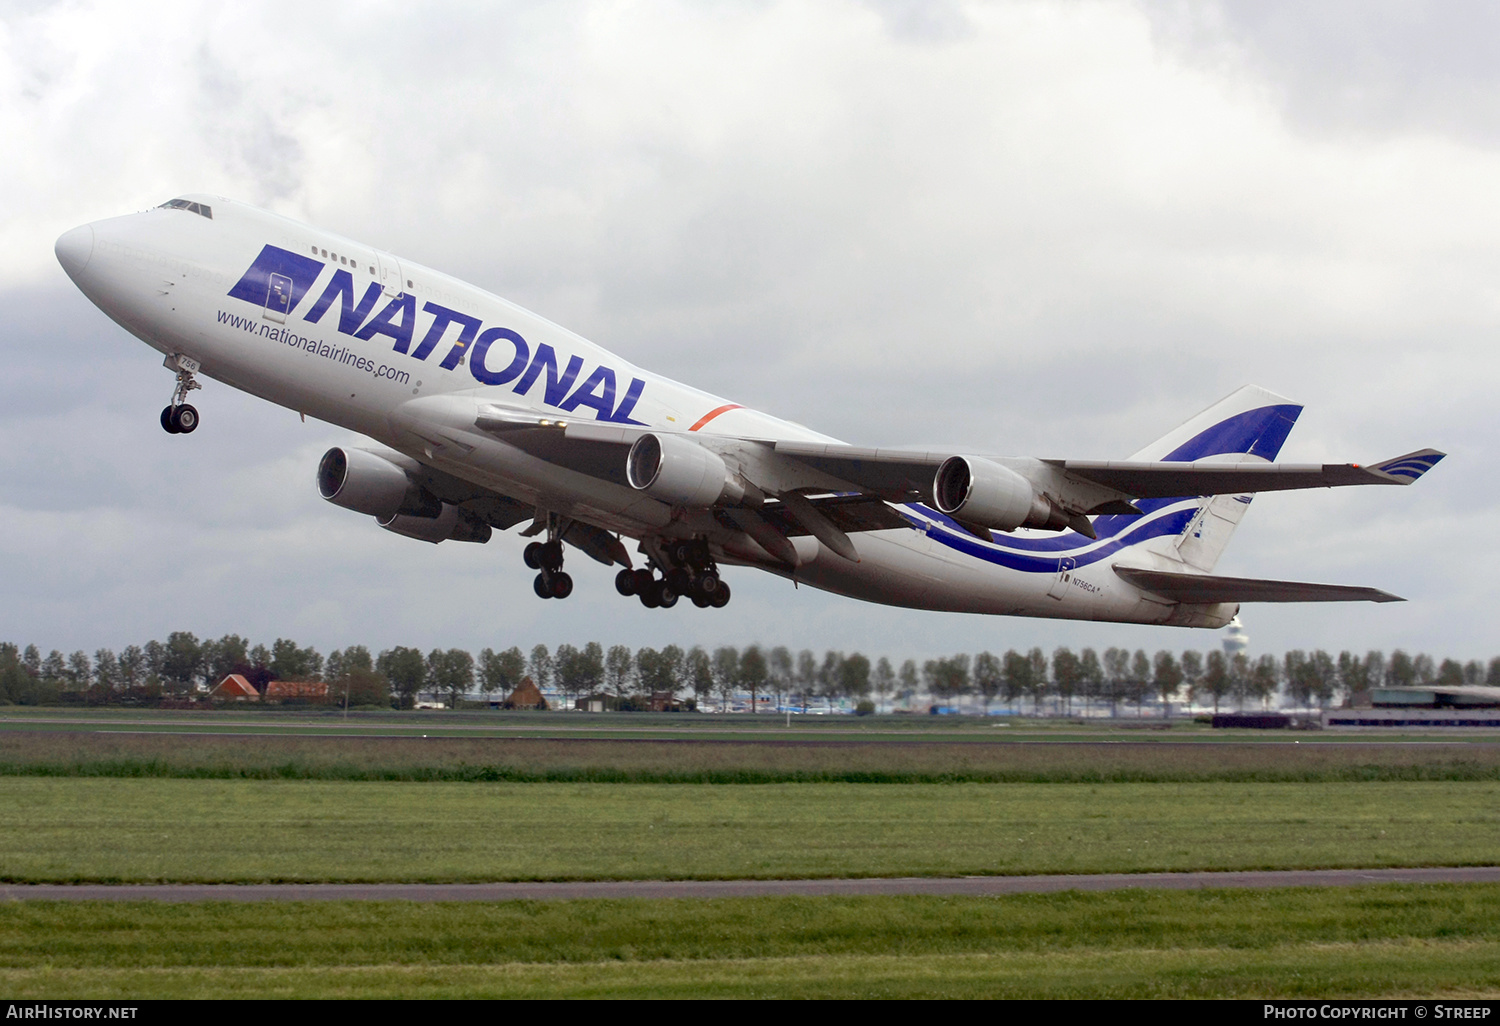 Aircraft Photo of N756CA, Boeing 747-412(BCF), National Airlines